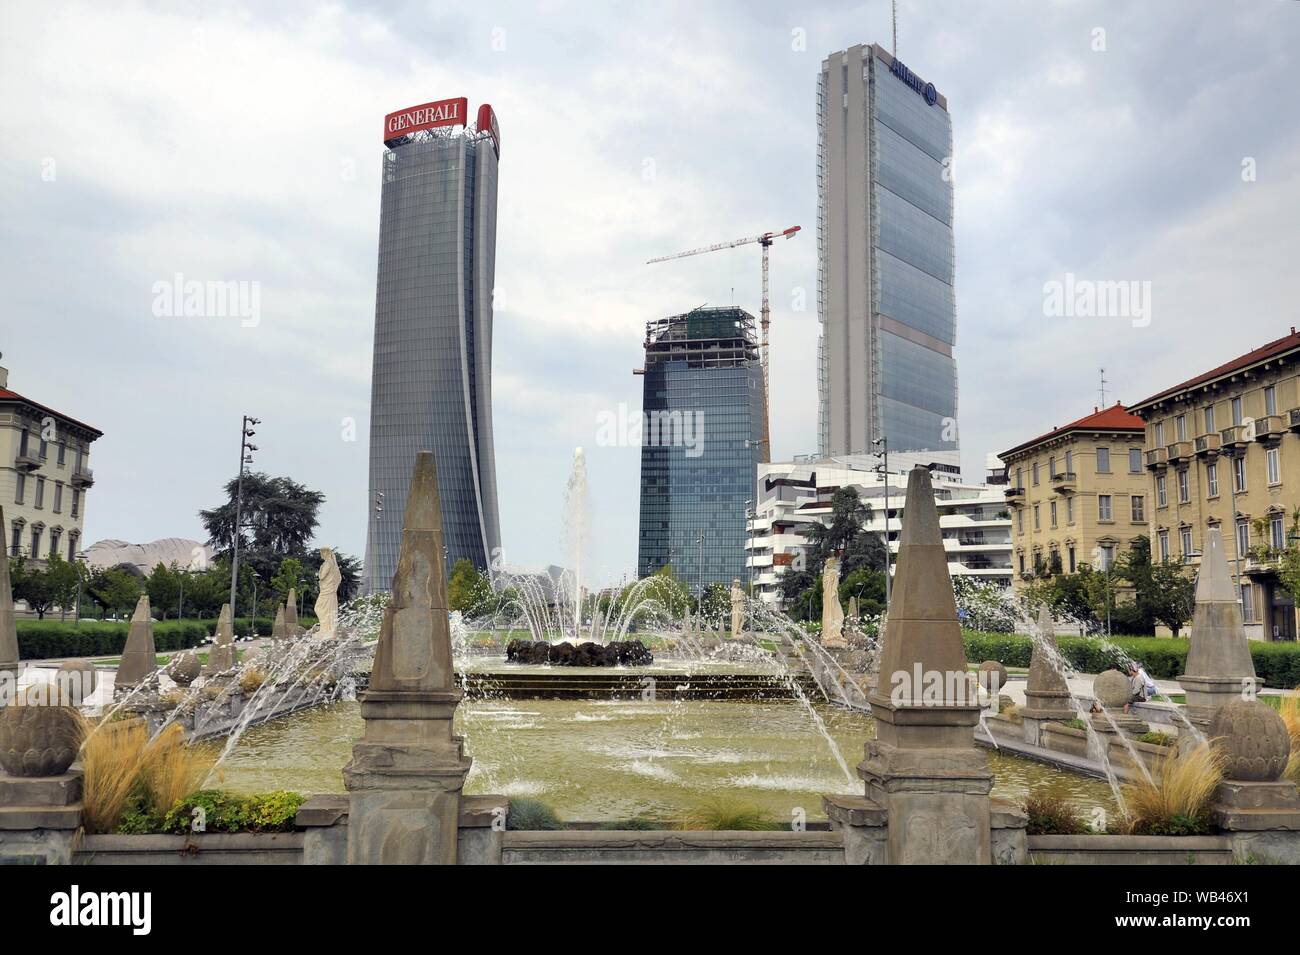 Milan (Italy), the new CityLife district, from left Hadid tower (Milan Assicurazioni Generali headquarters), Libeskind tower (PricewaterhouseCoopers) and Isozaki tower (new headquarters of Allianz Italy), nicknamed lo Storto, il Curvo and il Dritto (the Crooked, the Curved and the Straight) Stock Photo